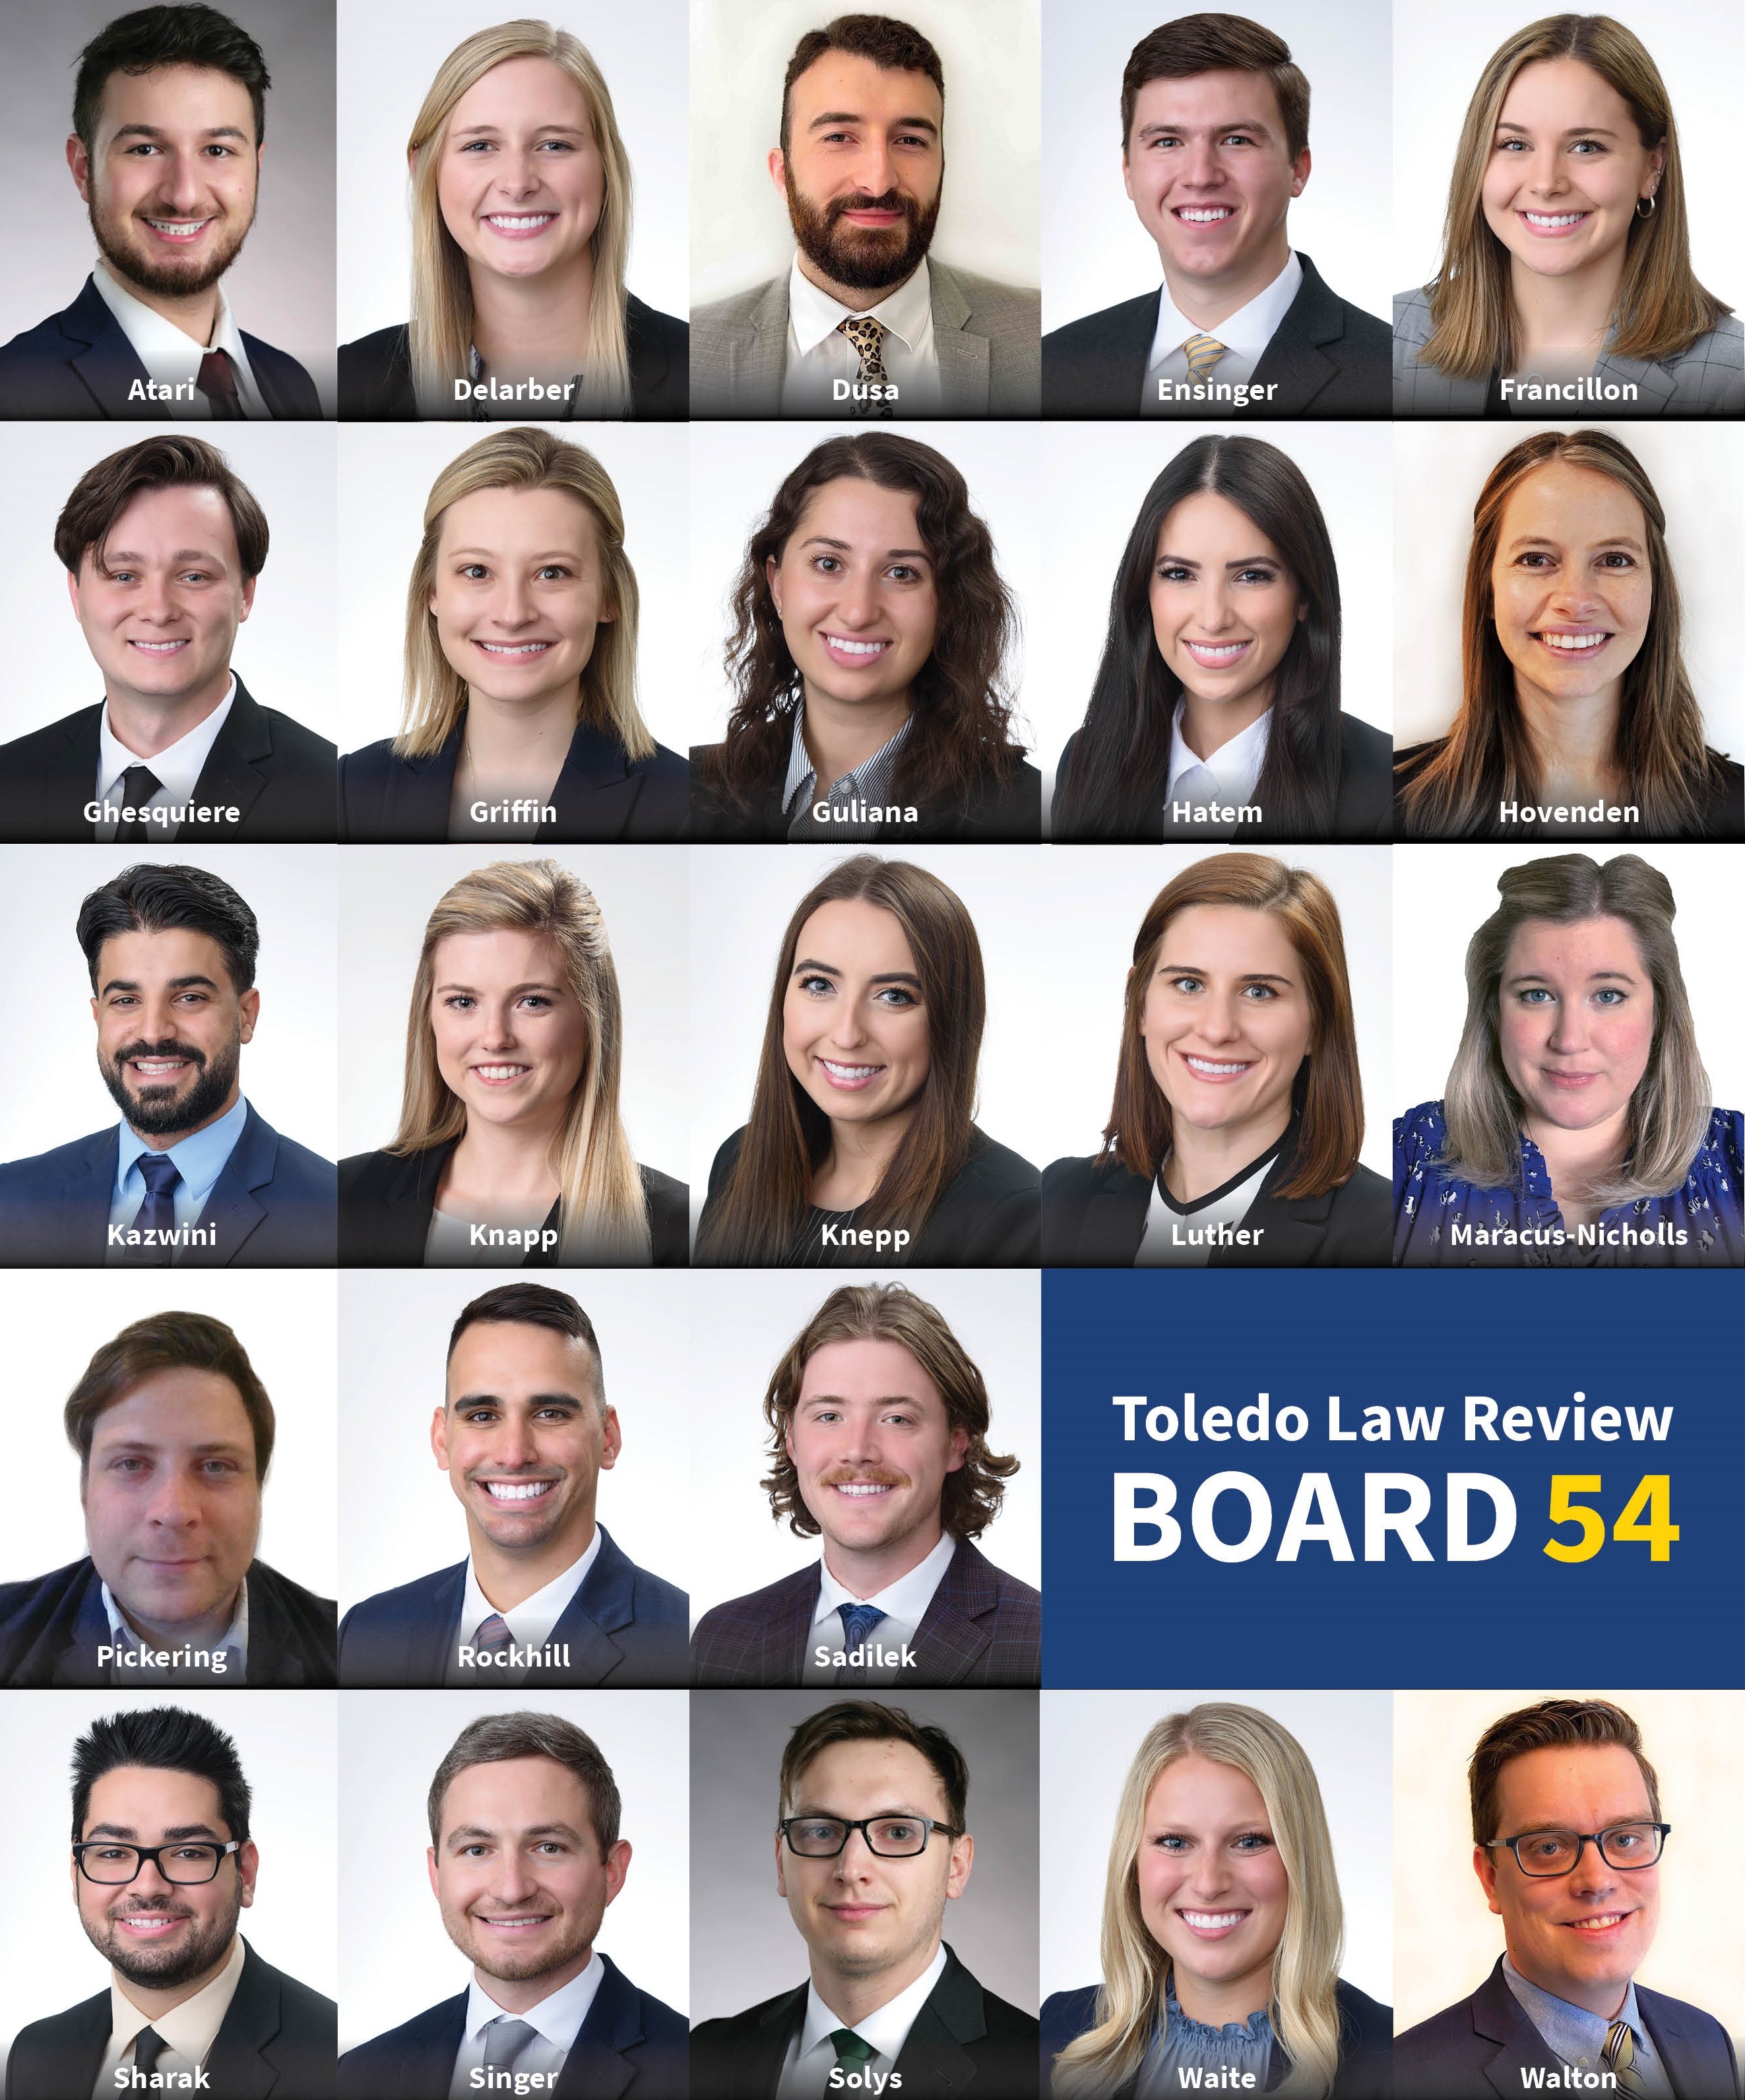 Law Review Board 54